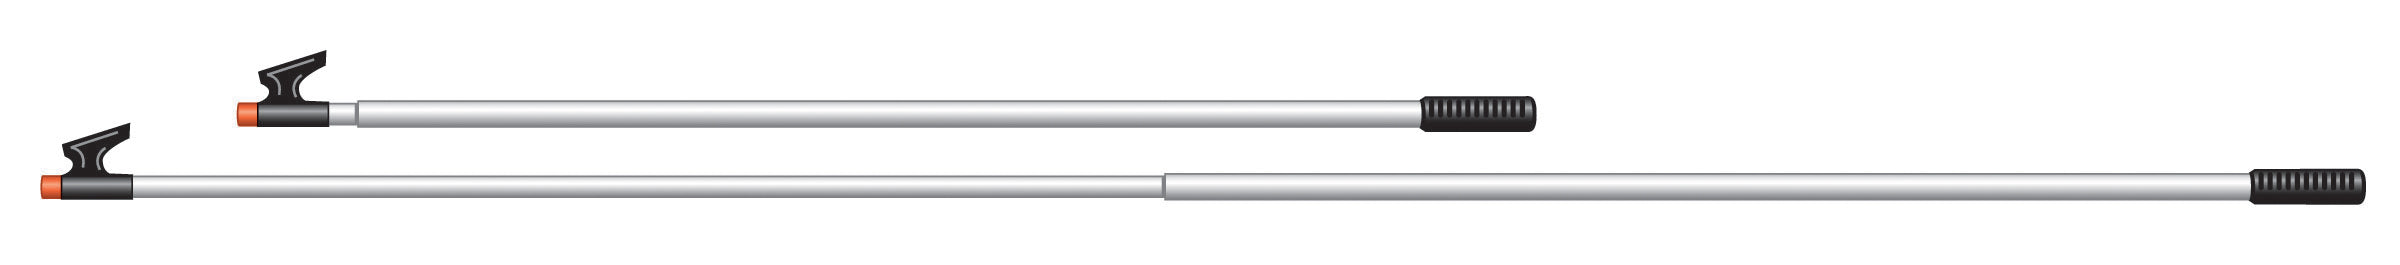 Telescoping 3-section Boat Hook, 38 in. to 8 ft. long (100 to 240 cm) - SKU 4132